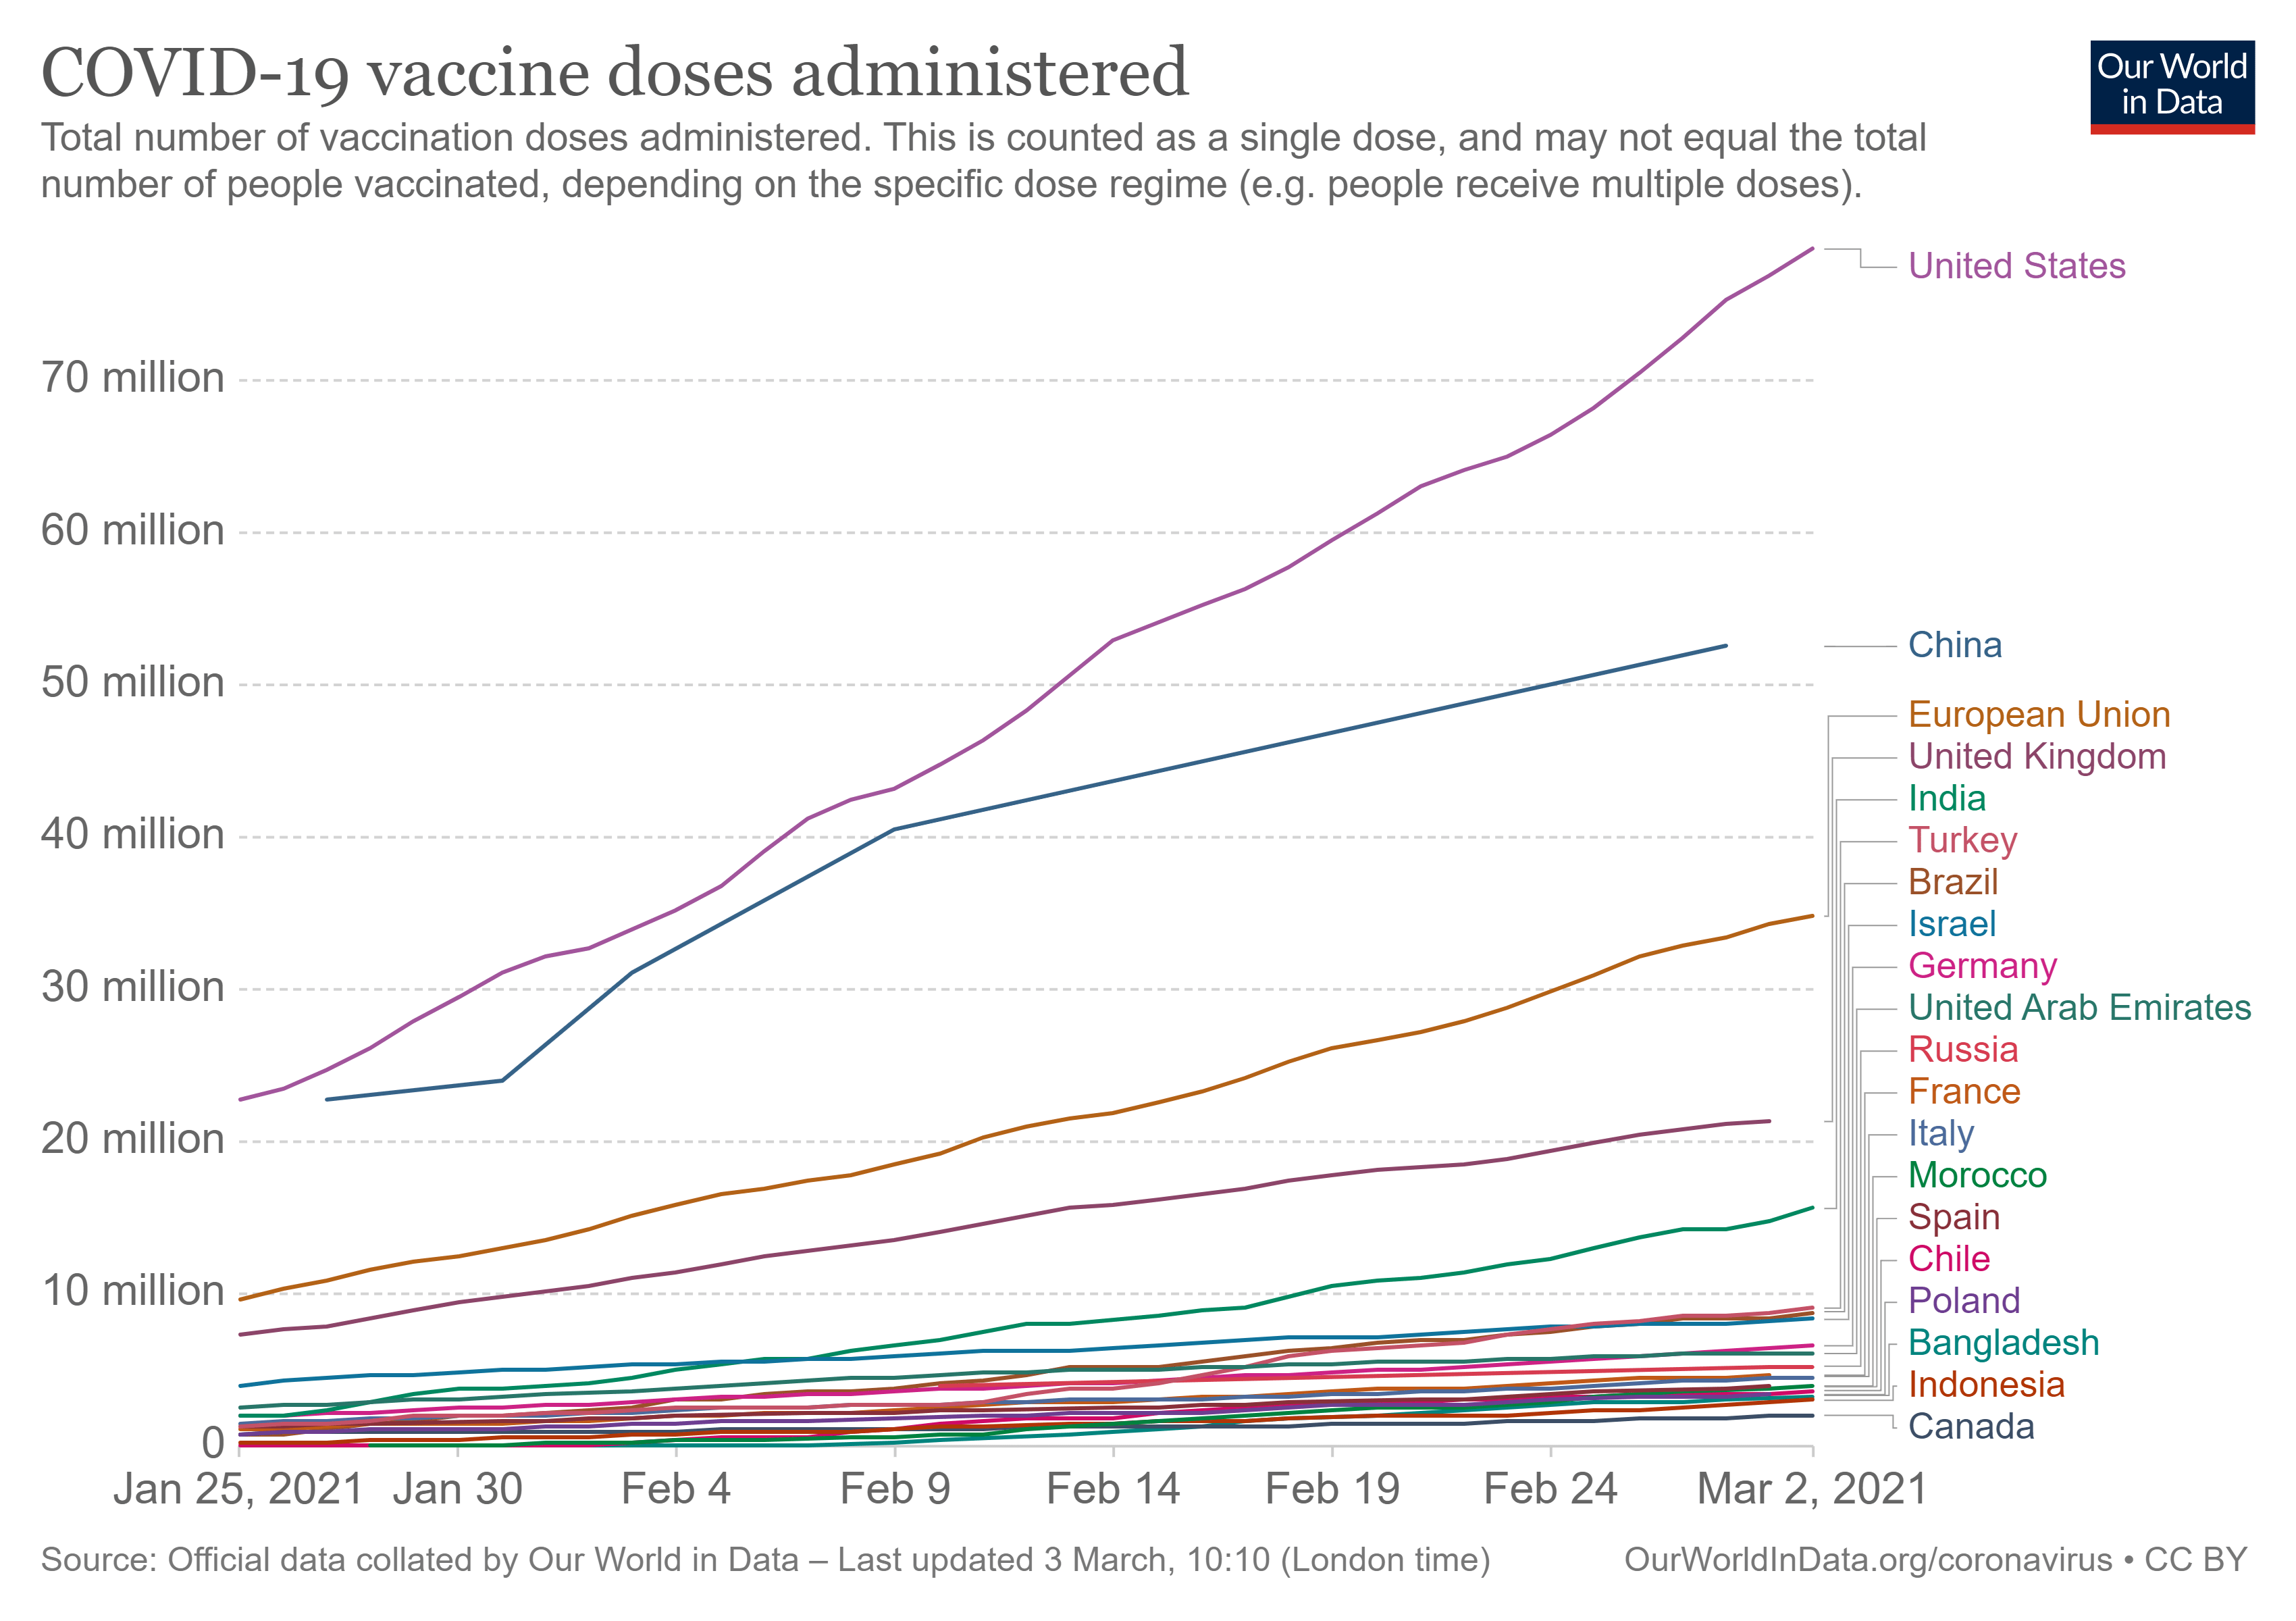 The USA leads the world in the number of doses of COVID-19 vaccine administered, but not in proportion to the vaccinated population